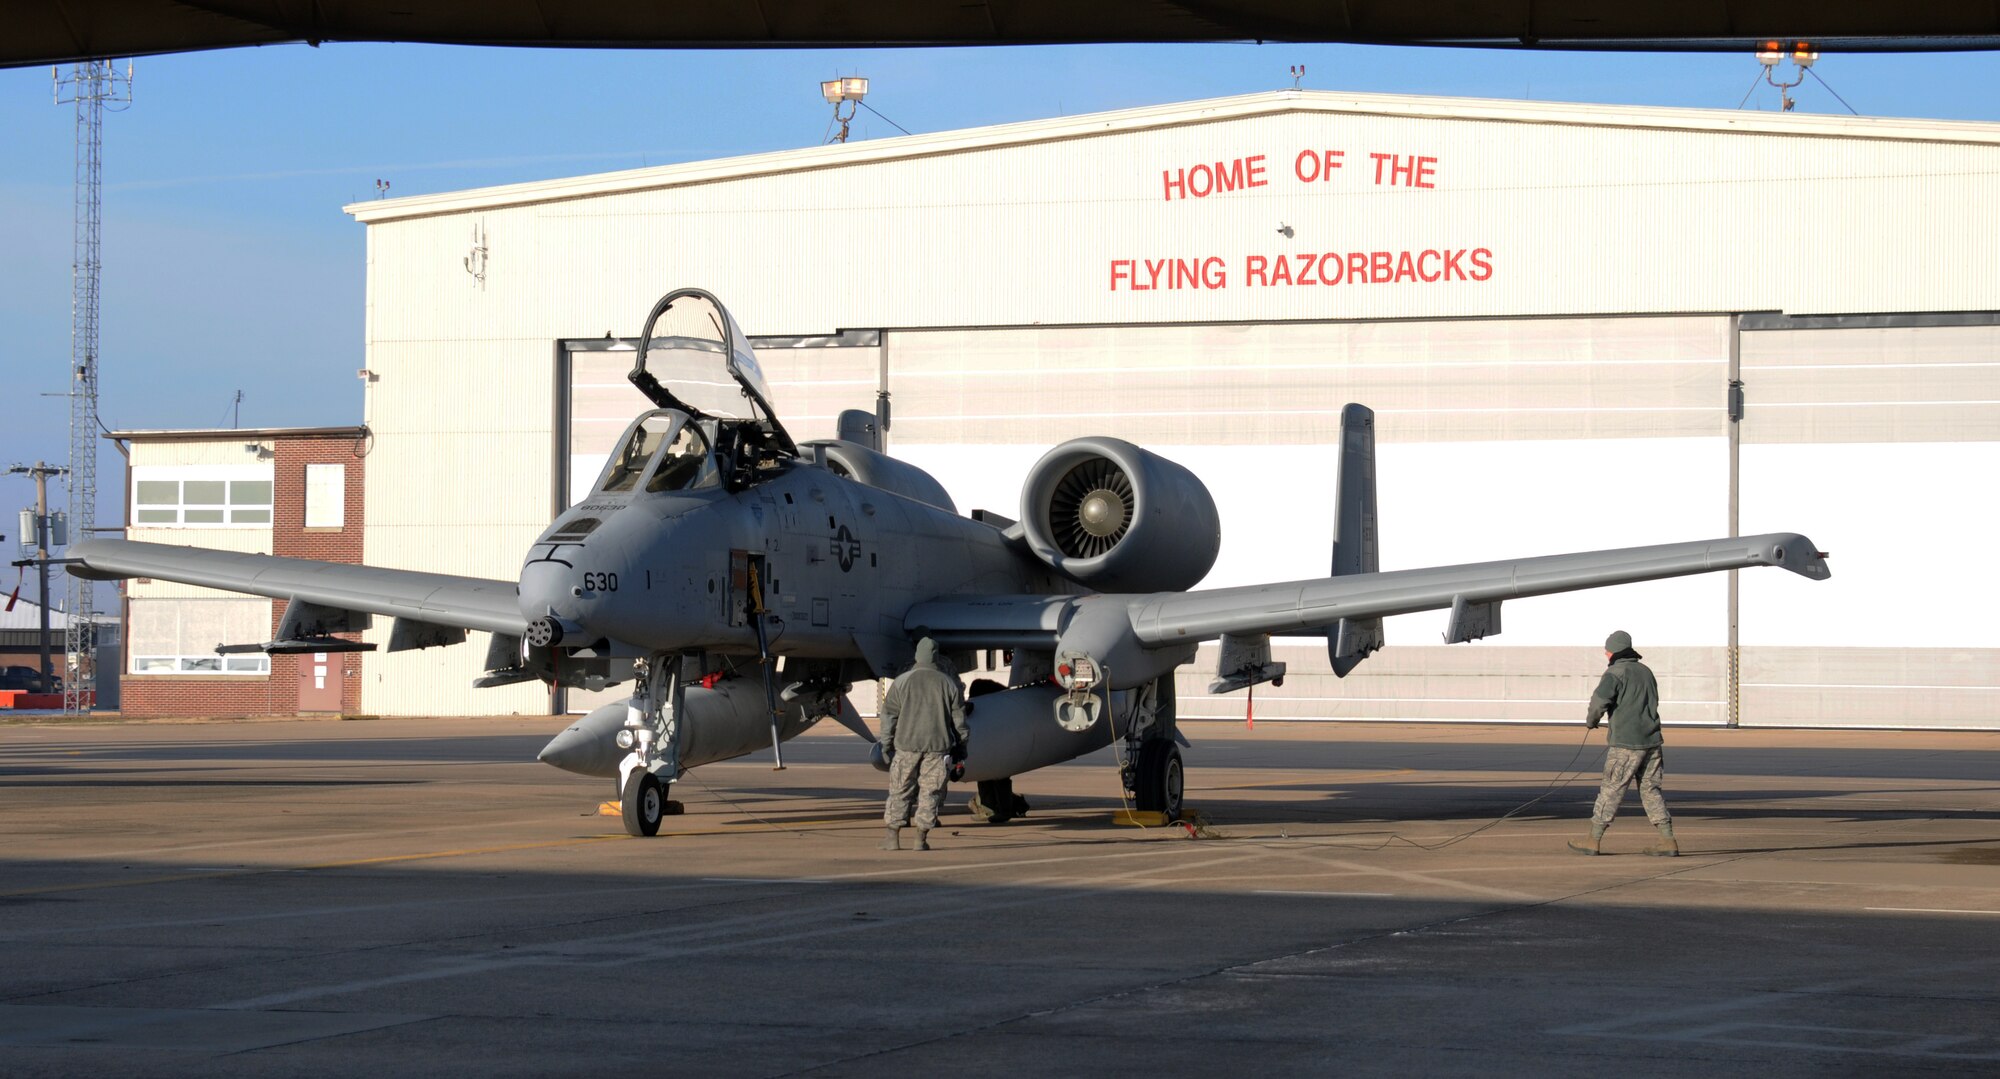 Crew chiefs with the 188th Aircraft Maintenance Squadron prep an A-10C Thunderbolt II "Warthog" for departure to Moody Air Force Base, Ga., Dec. 12, 2013. Tail Nos. 0630 and 0166 were transferred from the 188th's Ebbing Air National Guard Base, Fort Smith, Ark., as part of the wing’s on-going conversion from a fighter mission to remotely piloted aircraft and Intelligence mission, which will include a space-focused targeting squadron. (U.S. Air National Guard photo by Tech Sgt. Josh Lewis/188th Fighter Wing Public Affairs)